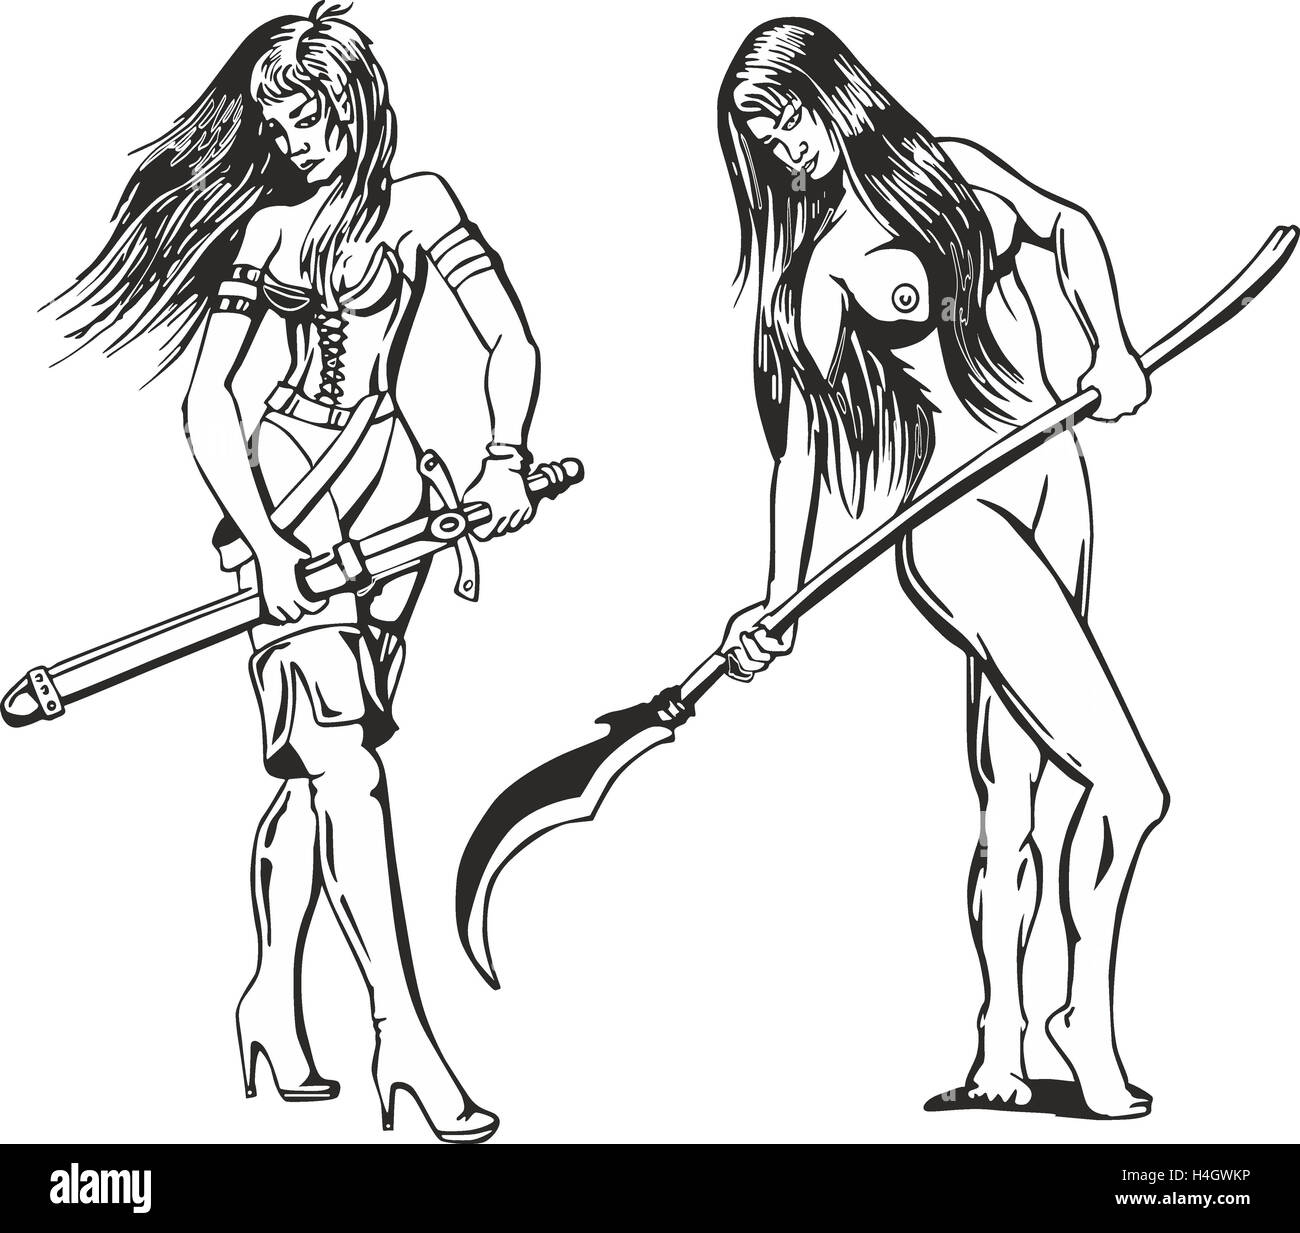 Fantasy set of two sexy amazon women with blades. Mythical lady warriors  Stock Photo - Alamy